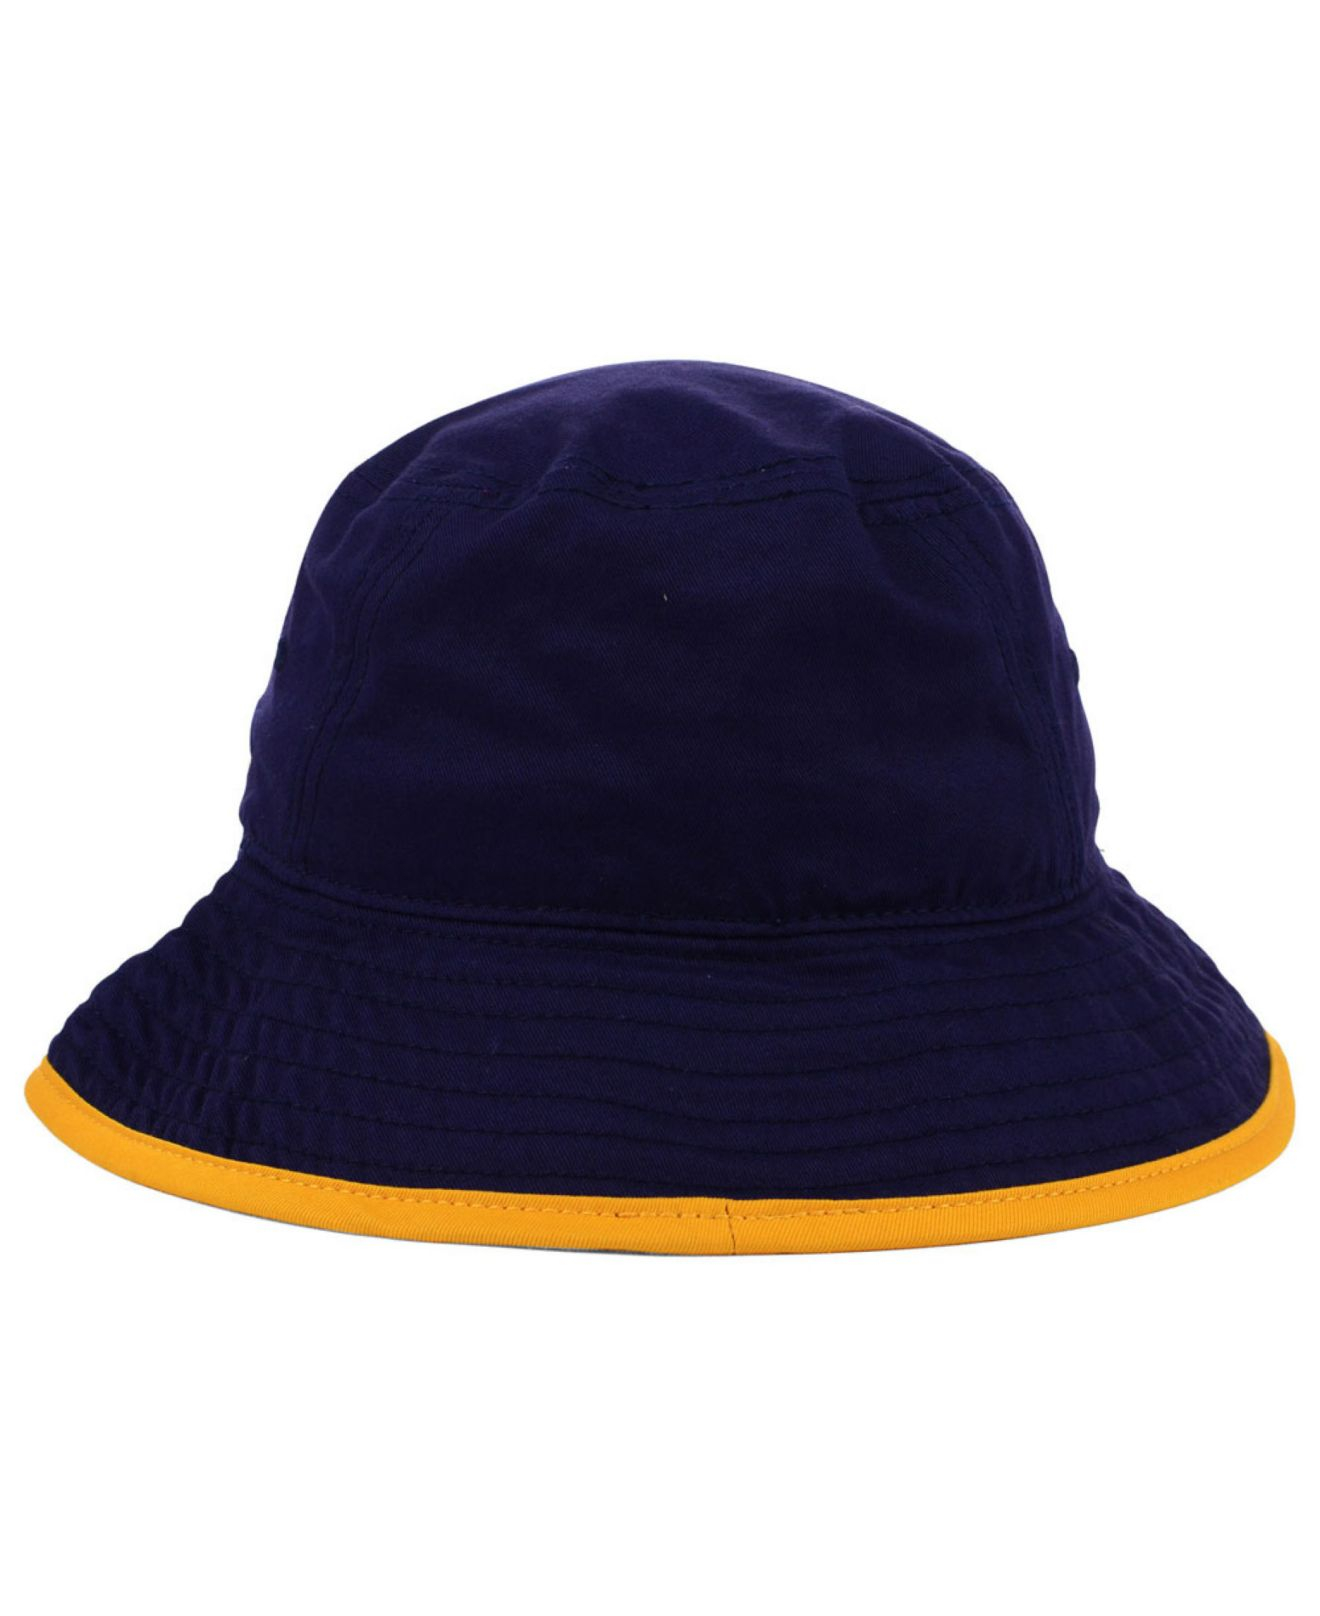 St. Louis Blues - Back by popular demand Grateful Dead Night returns for  its second season! This one-of-a-kind reversible bucket hat will only be  available with the purchase of a special theme